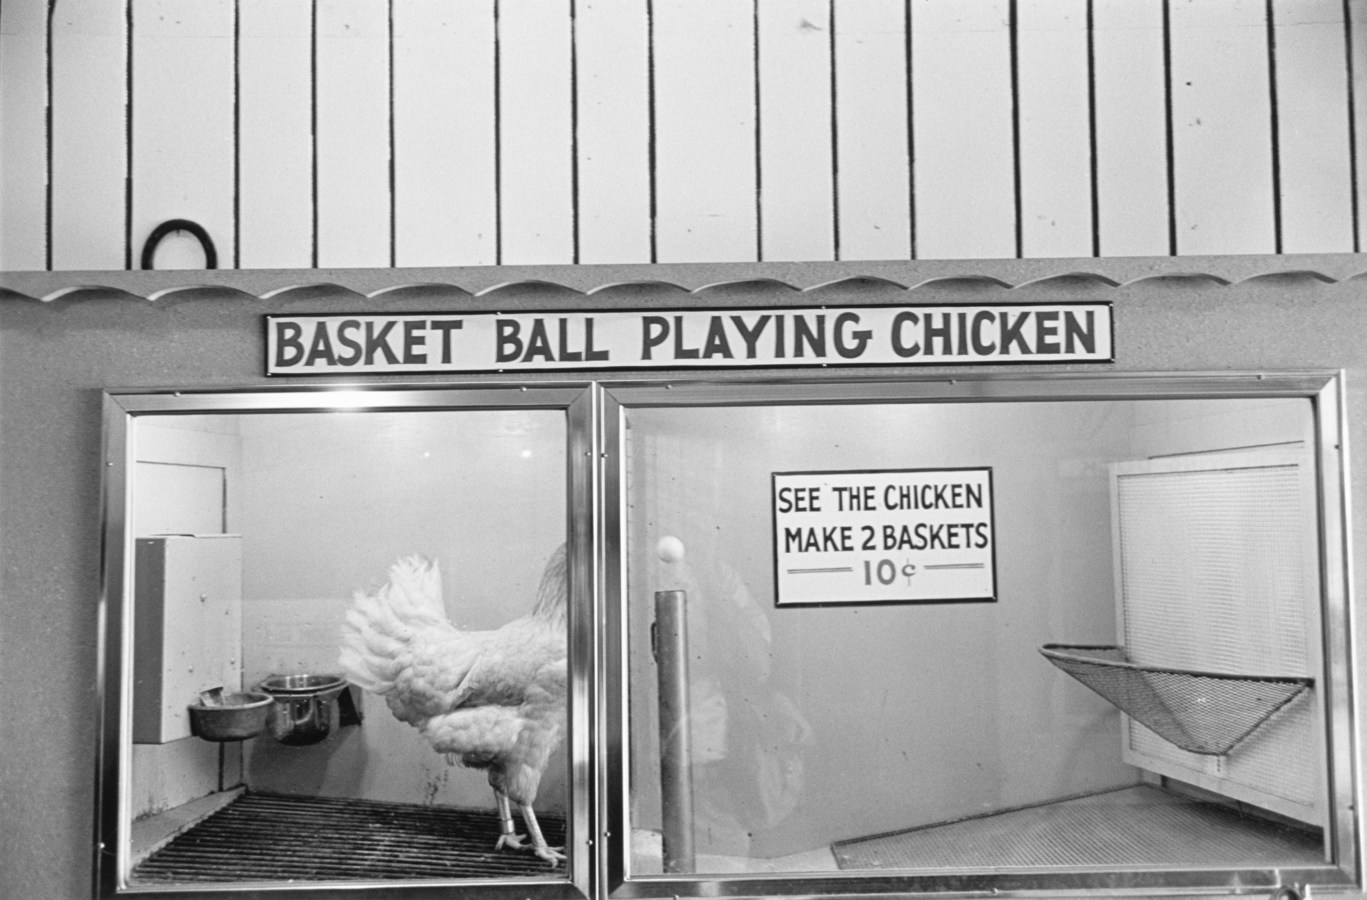 Black-and-white photograph of a basket ball playing chicken attraction